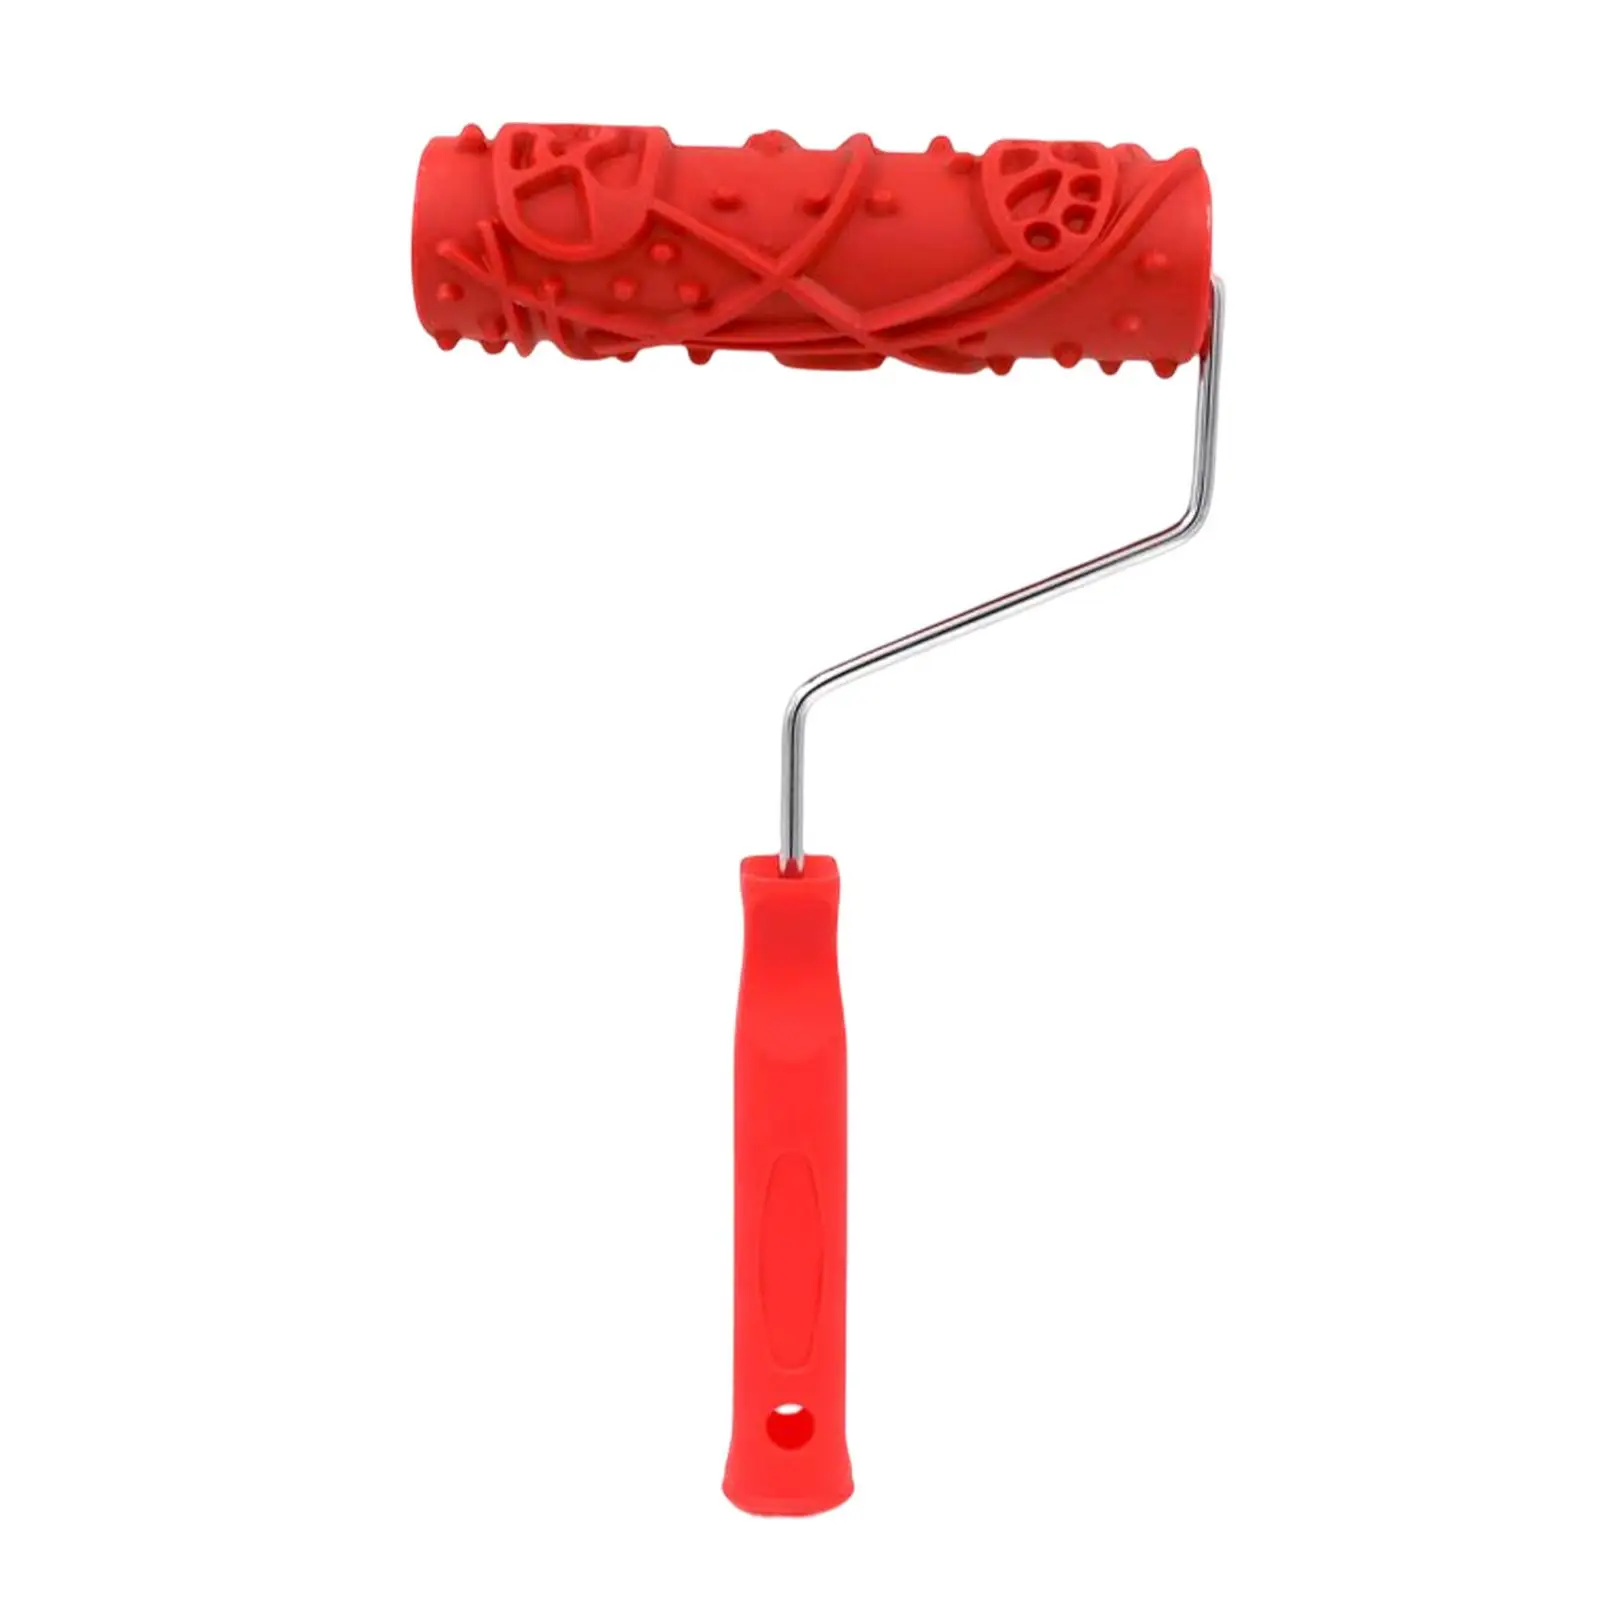 

7" Patterned Paint Roller Painting Tool European Style with Plastic Handle Texture Soft Rubber Roller Room Decoration